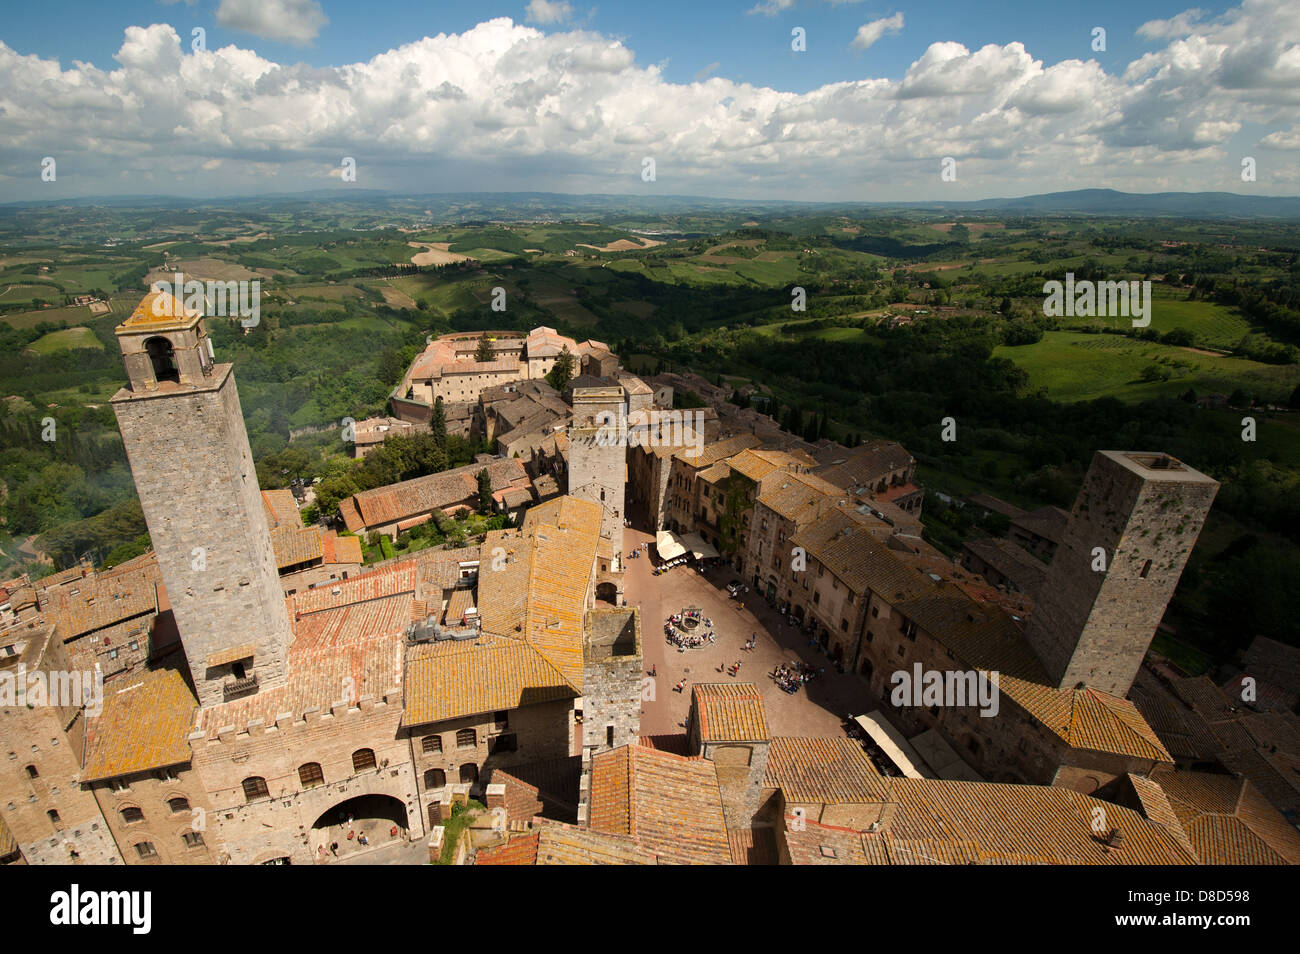 View over the medieval hilltop town San Gimignano, Tuscany, Italy, Europe Stock Photo